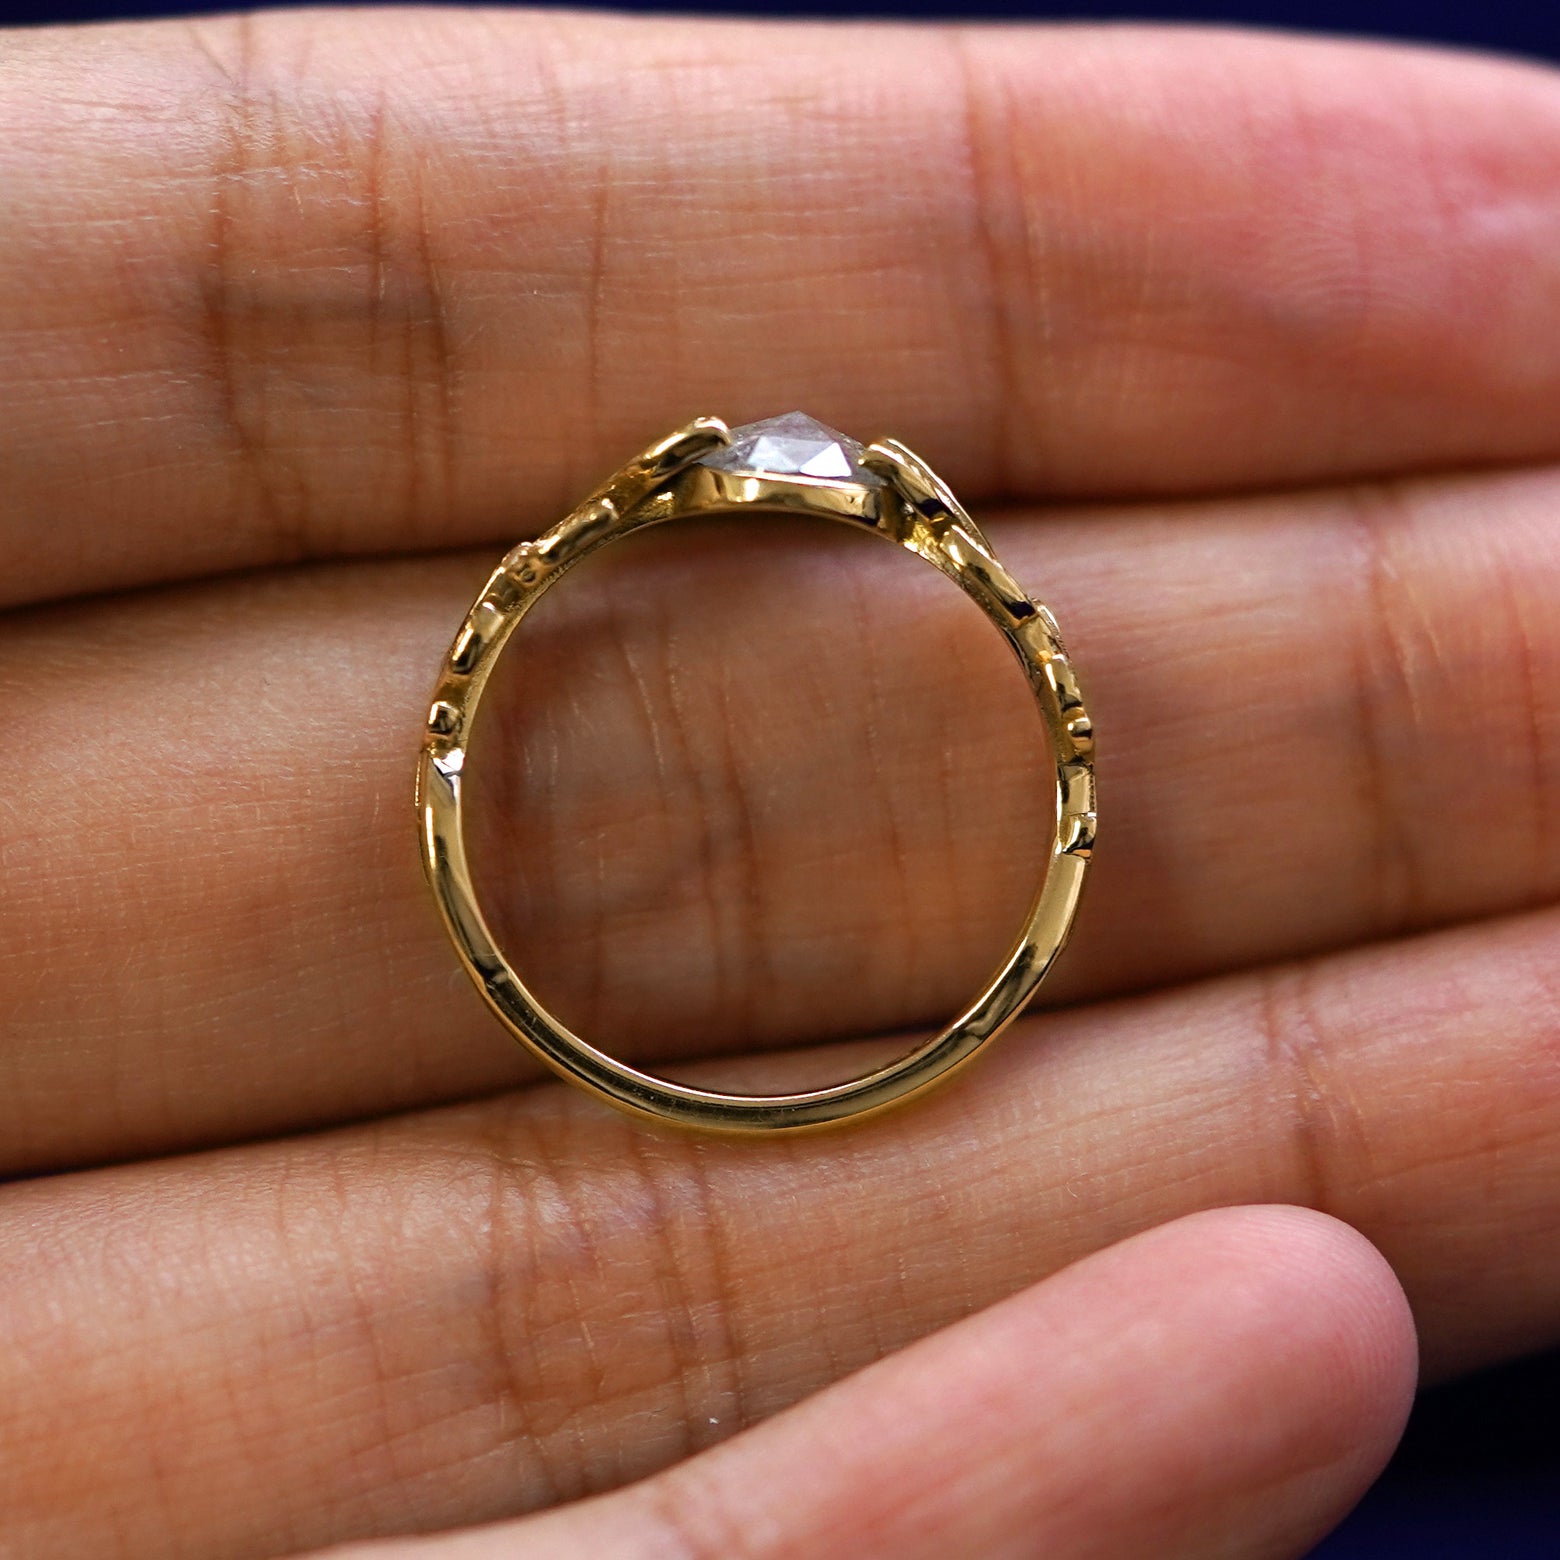 A yellow gold Diamond Leaves Ring in a model's hand showing the thickness of the band